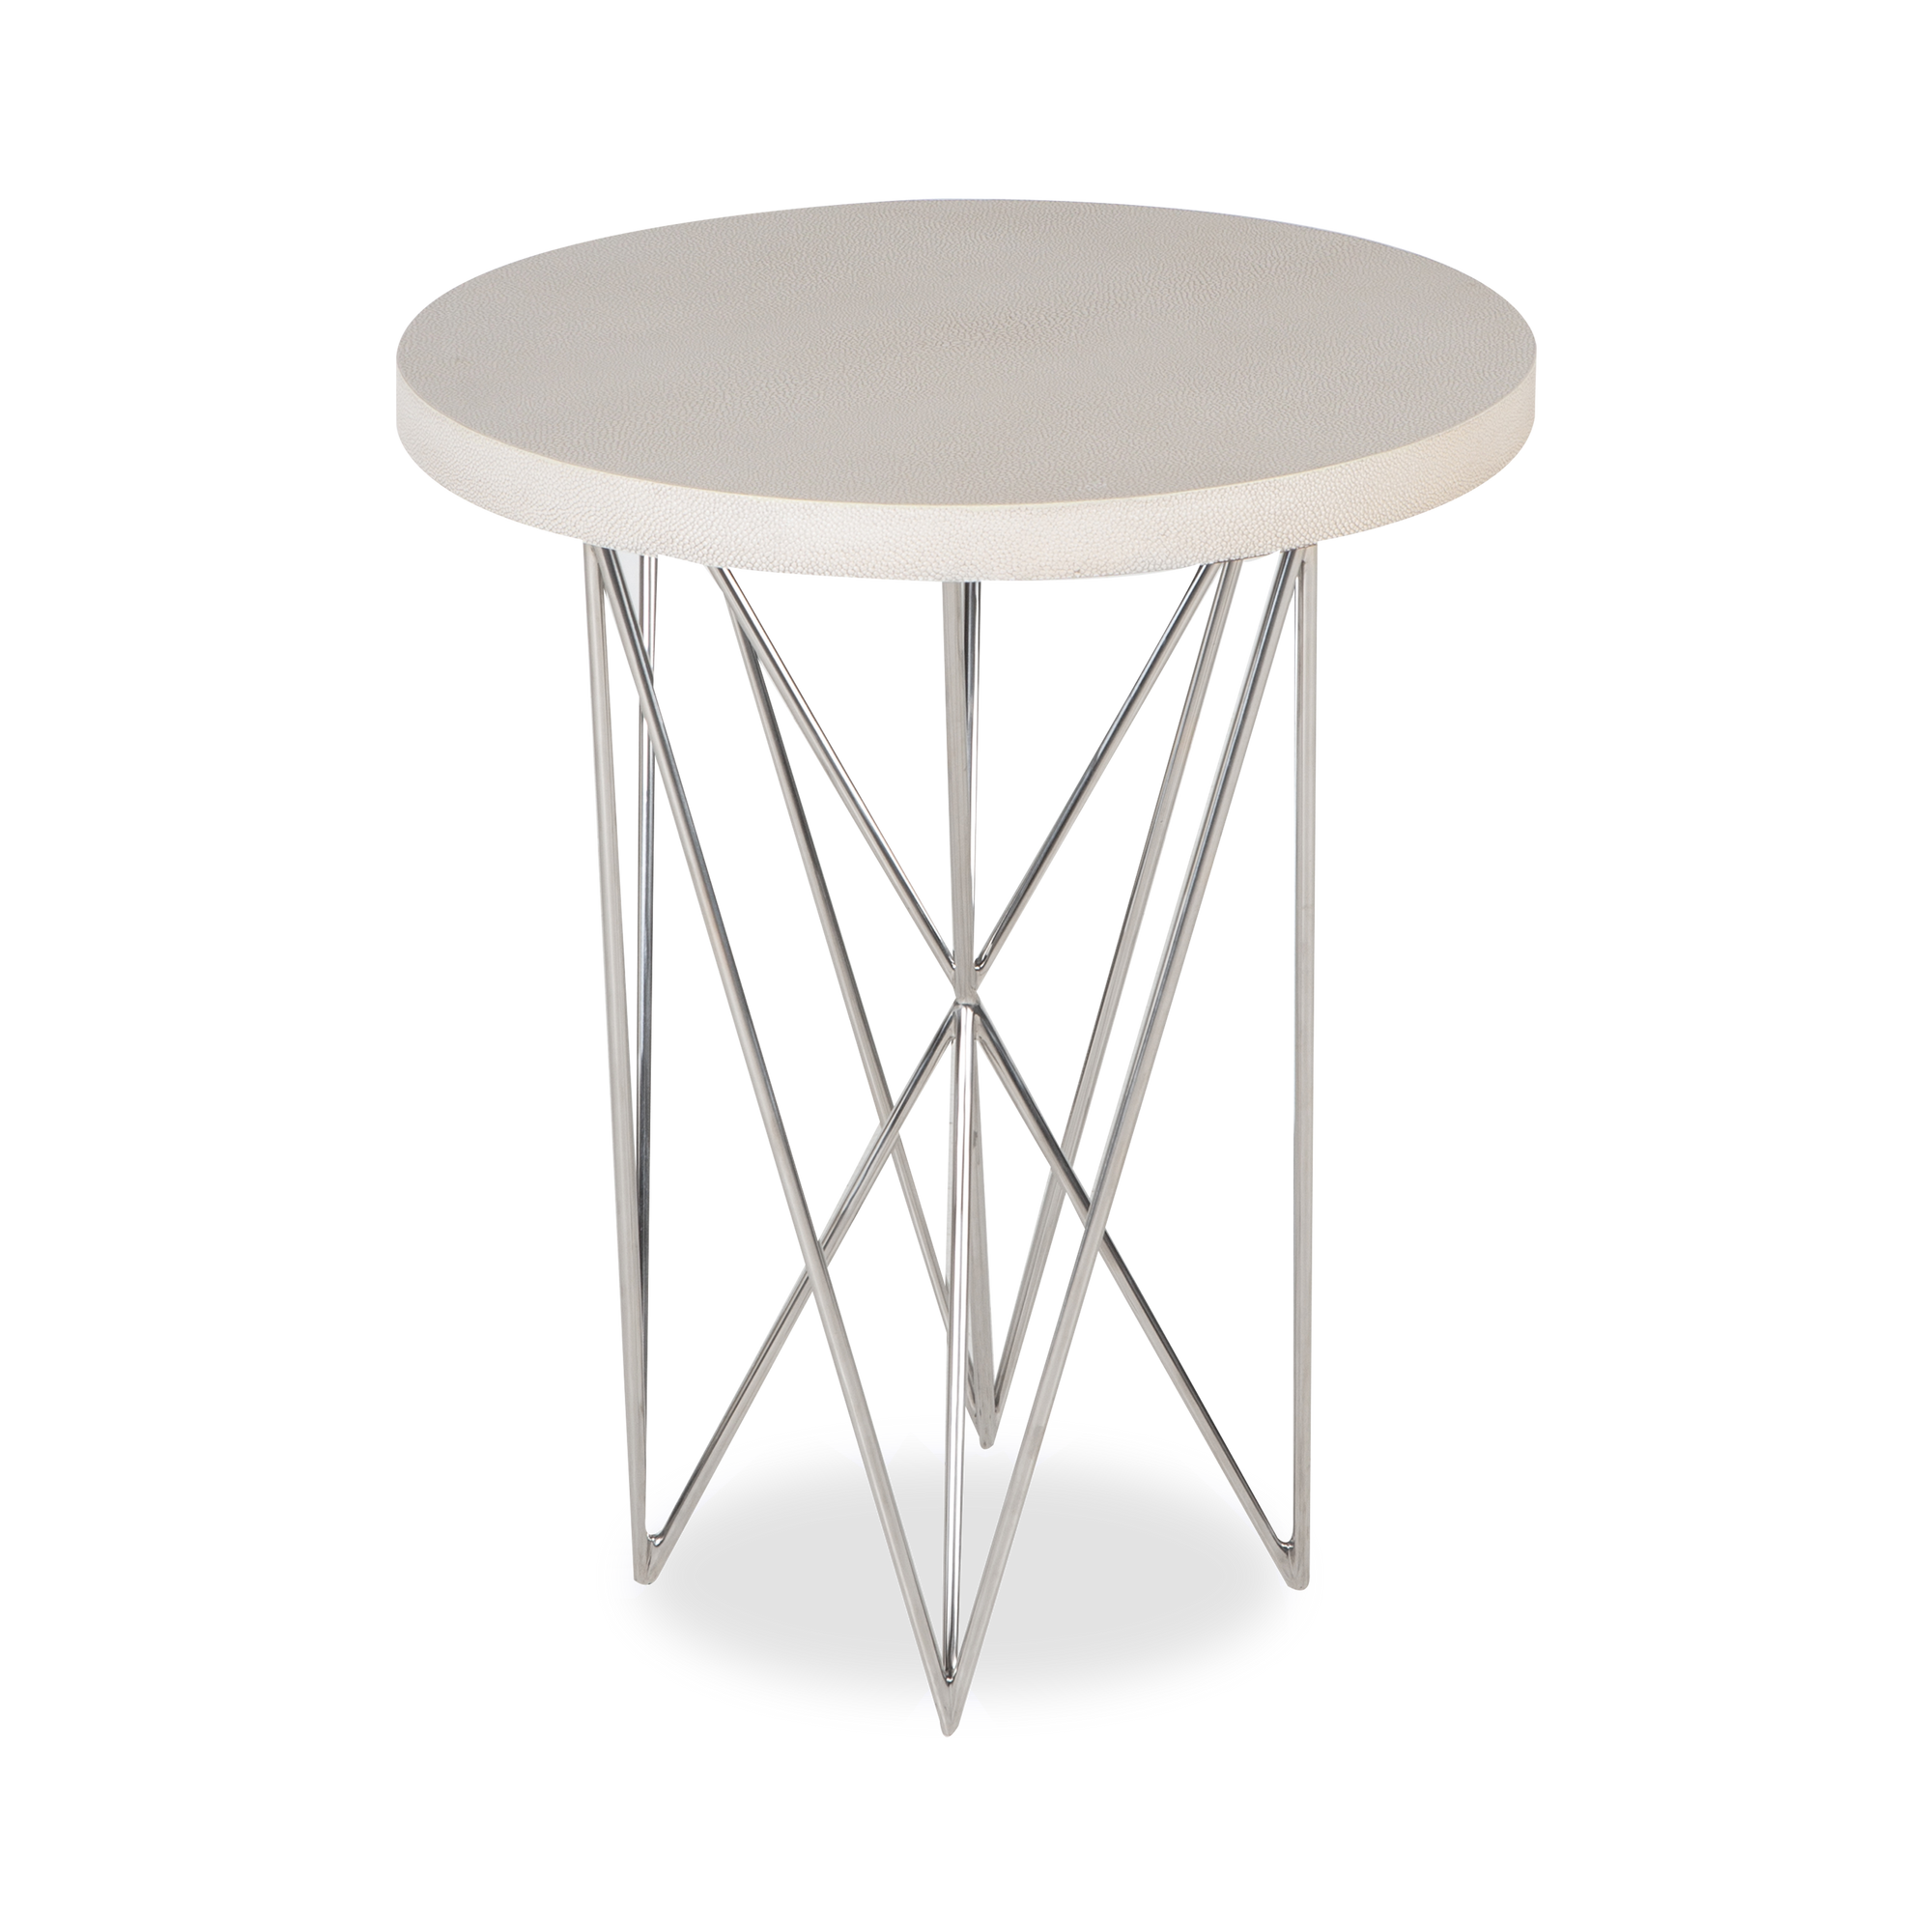 Merging luxurious materials with an elegant industrial design, the Admiral Pull Up Table is a distinctive and versatile addition to your space.